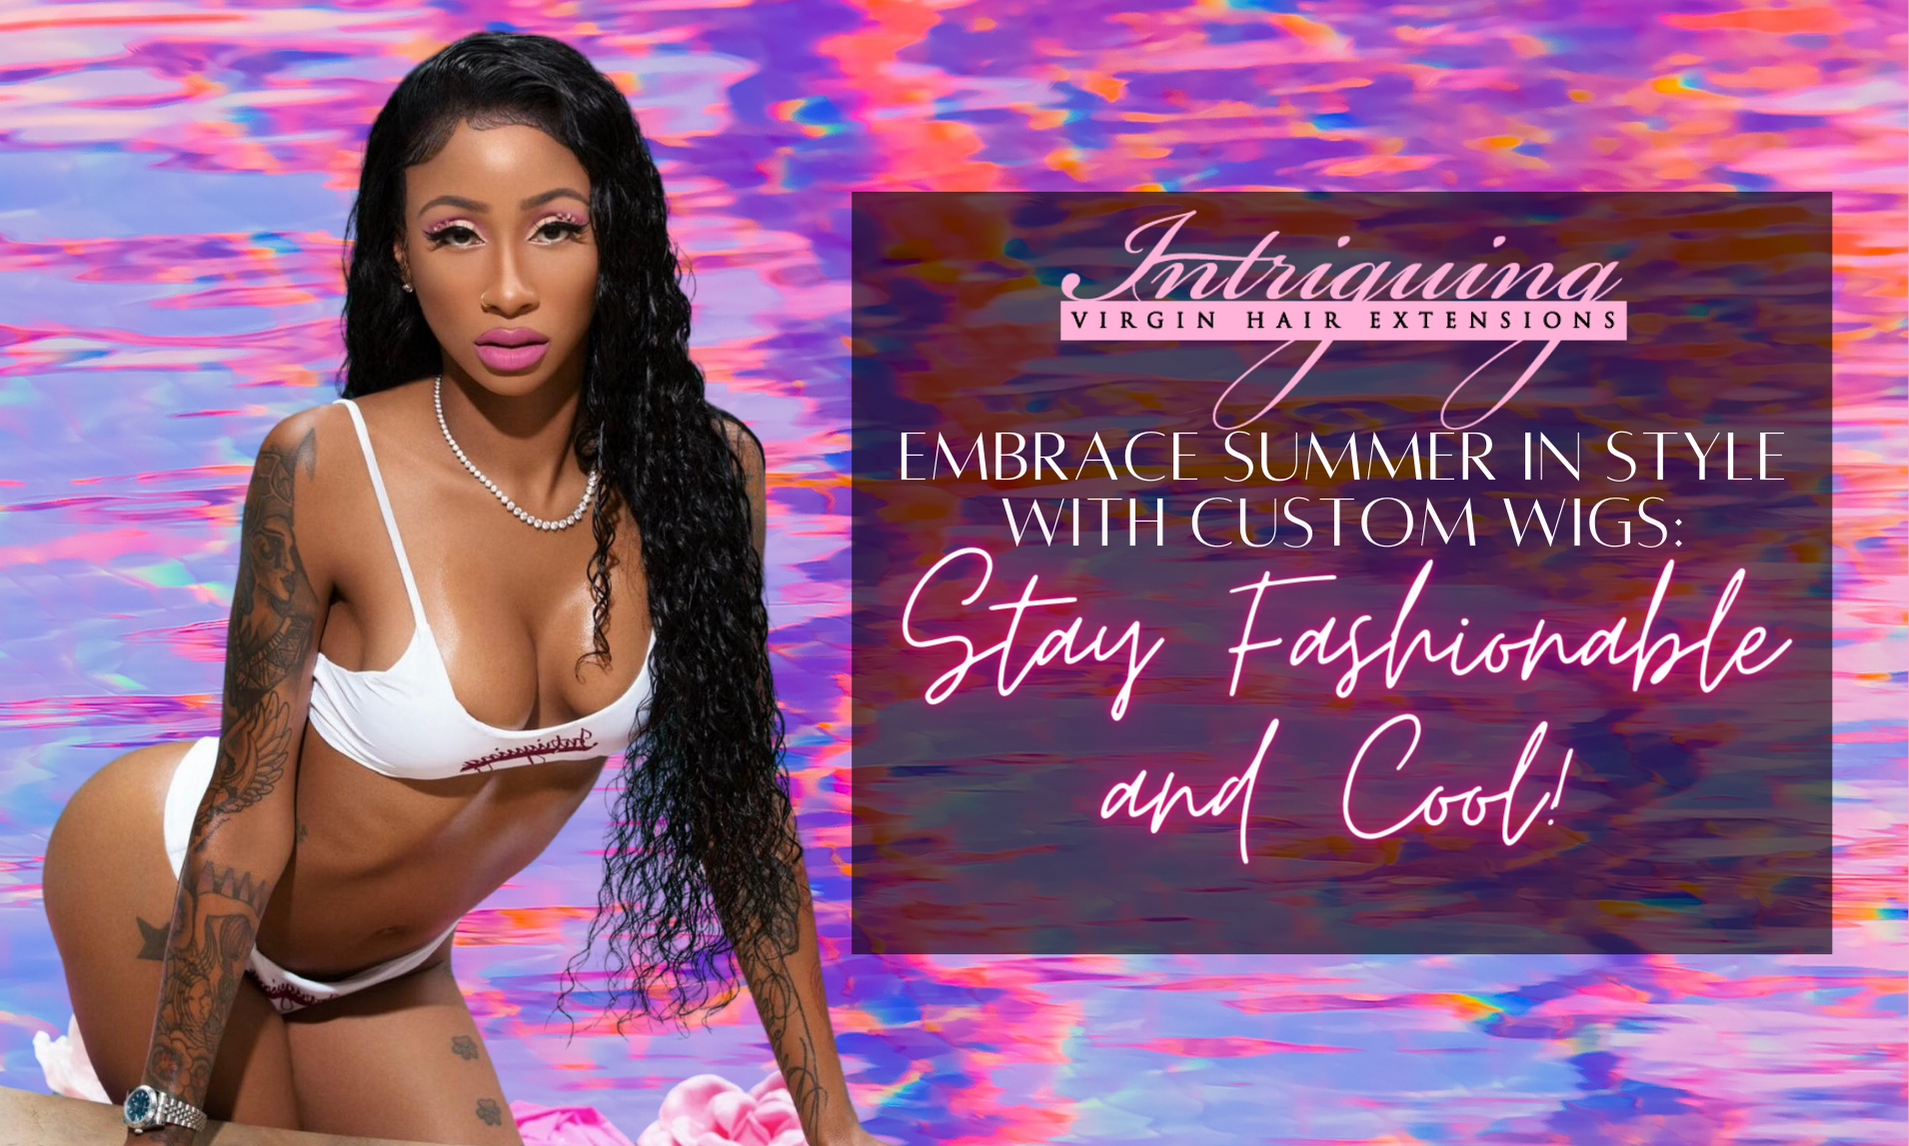 Embrace Summer in Style with Custom Wigs: Stay Fashionable and Cool